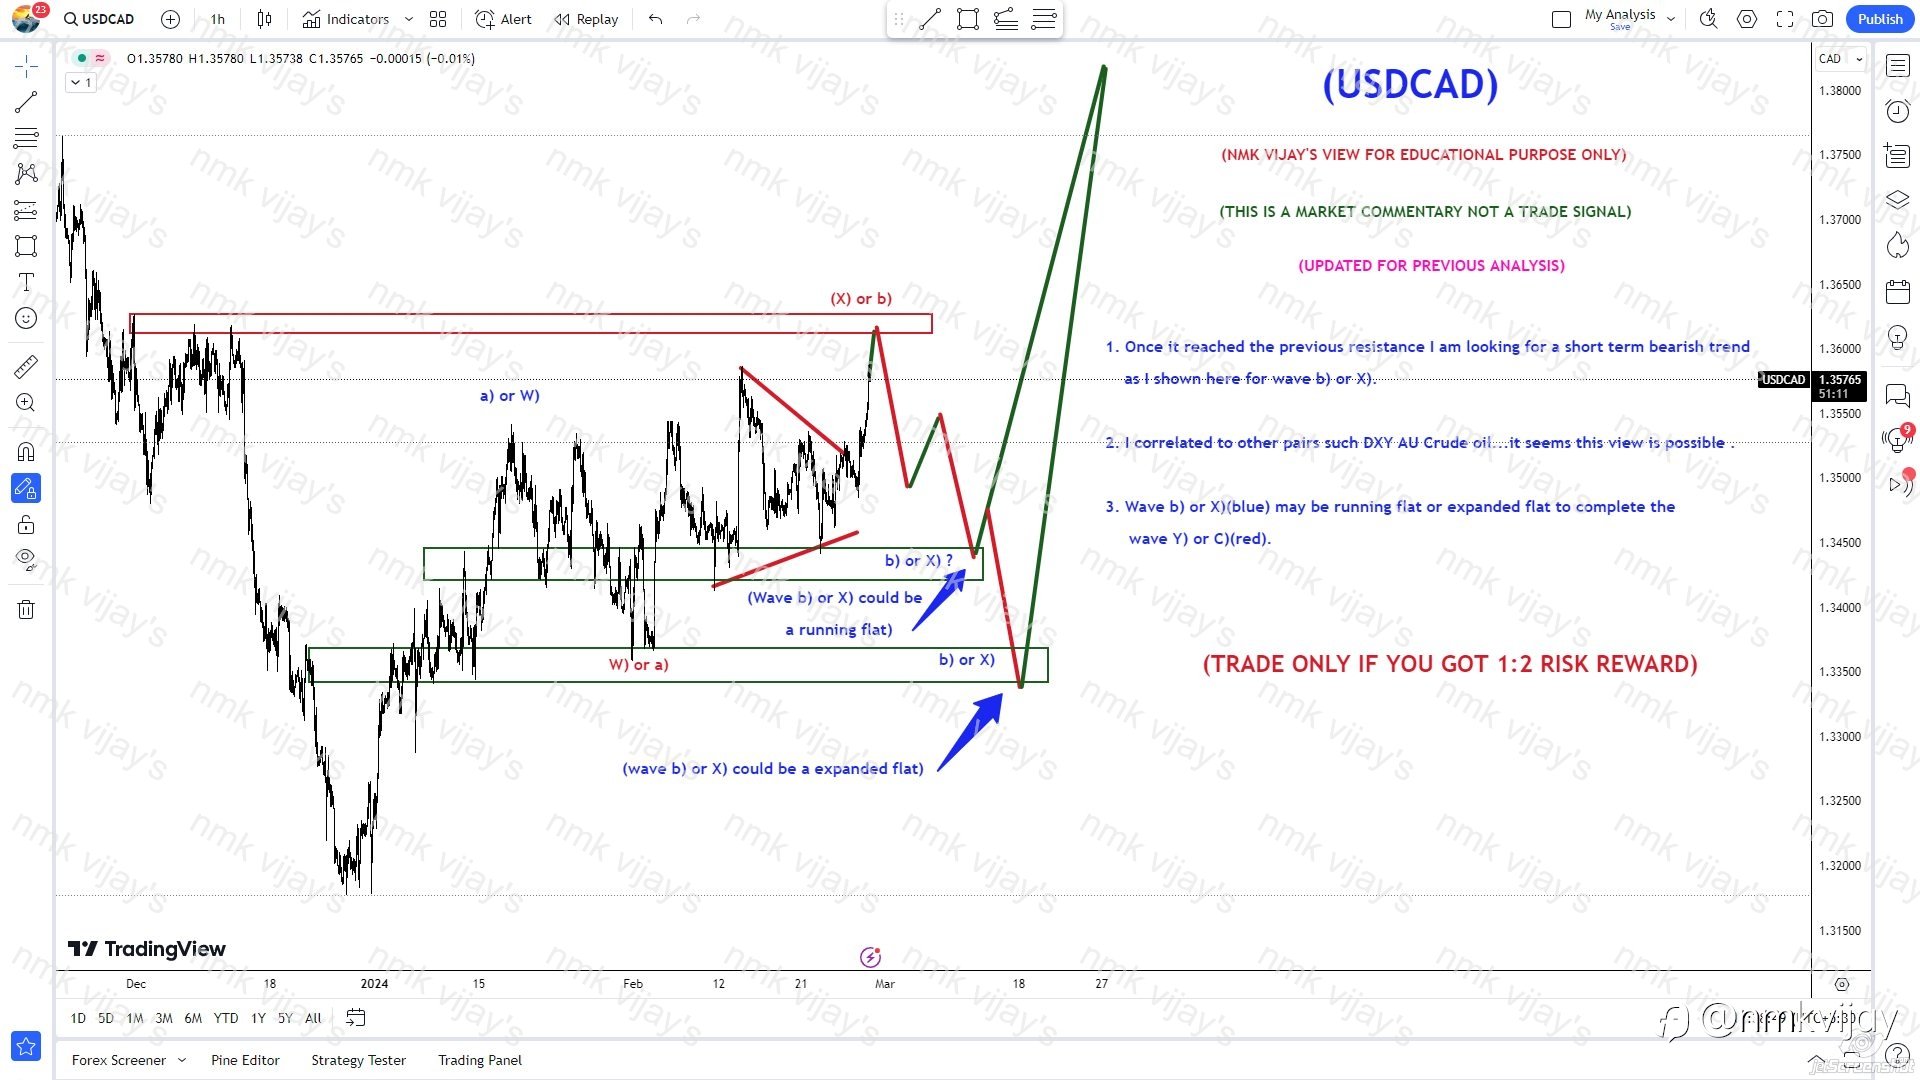 USDCAD: Expecting a running or Expanded flat as a bearish.